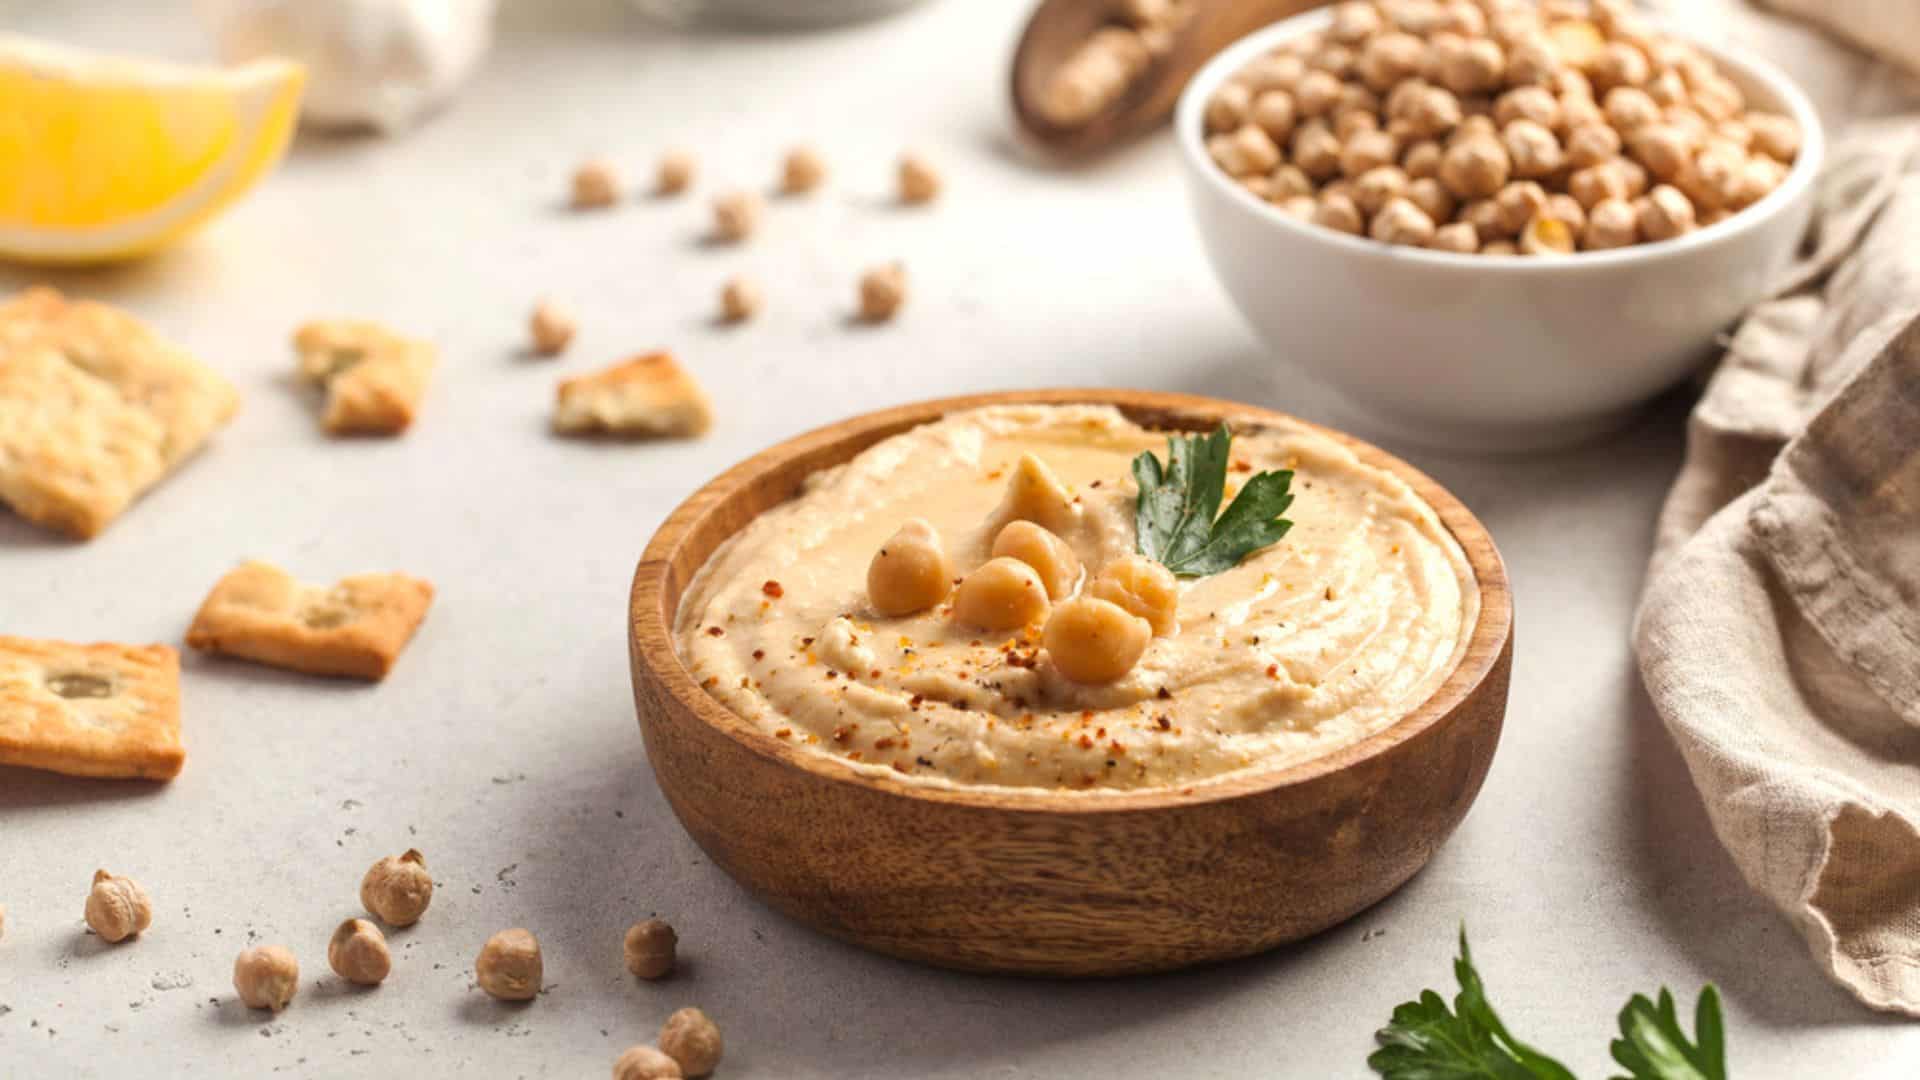 Hummus in a wooden plate with parsley and croutons